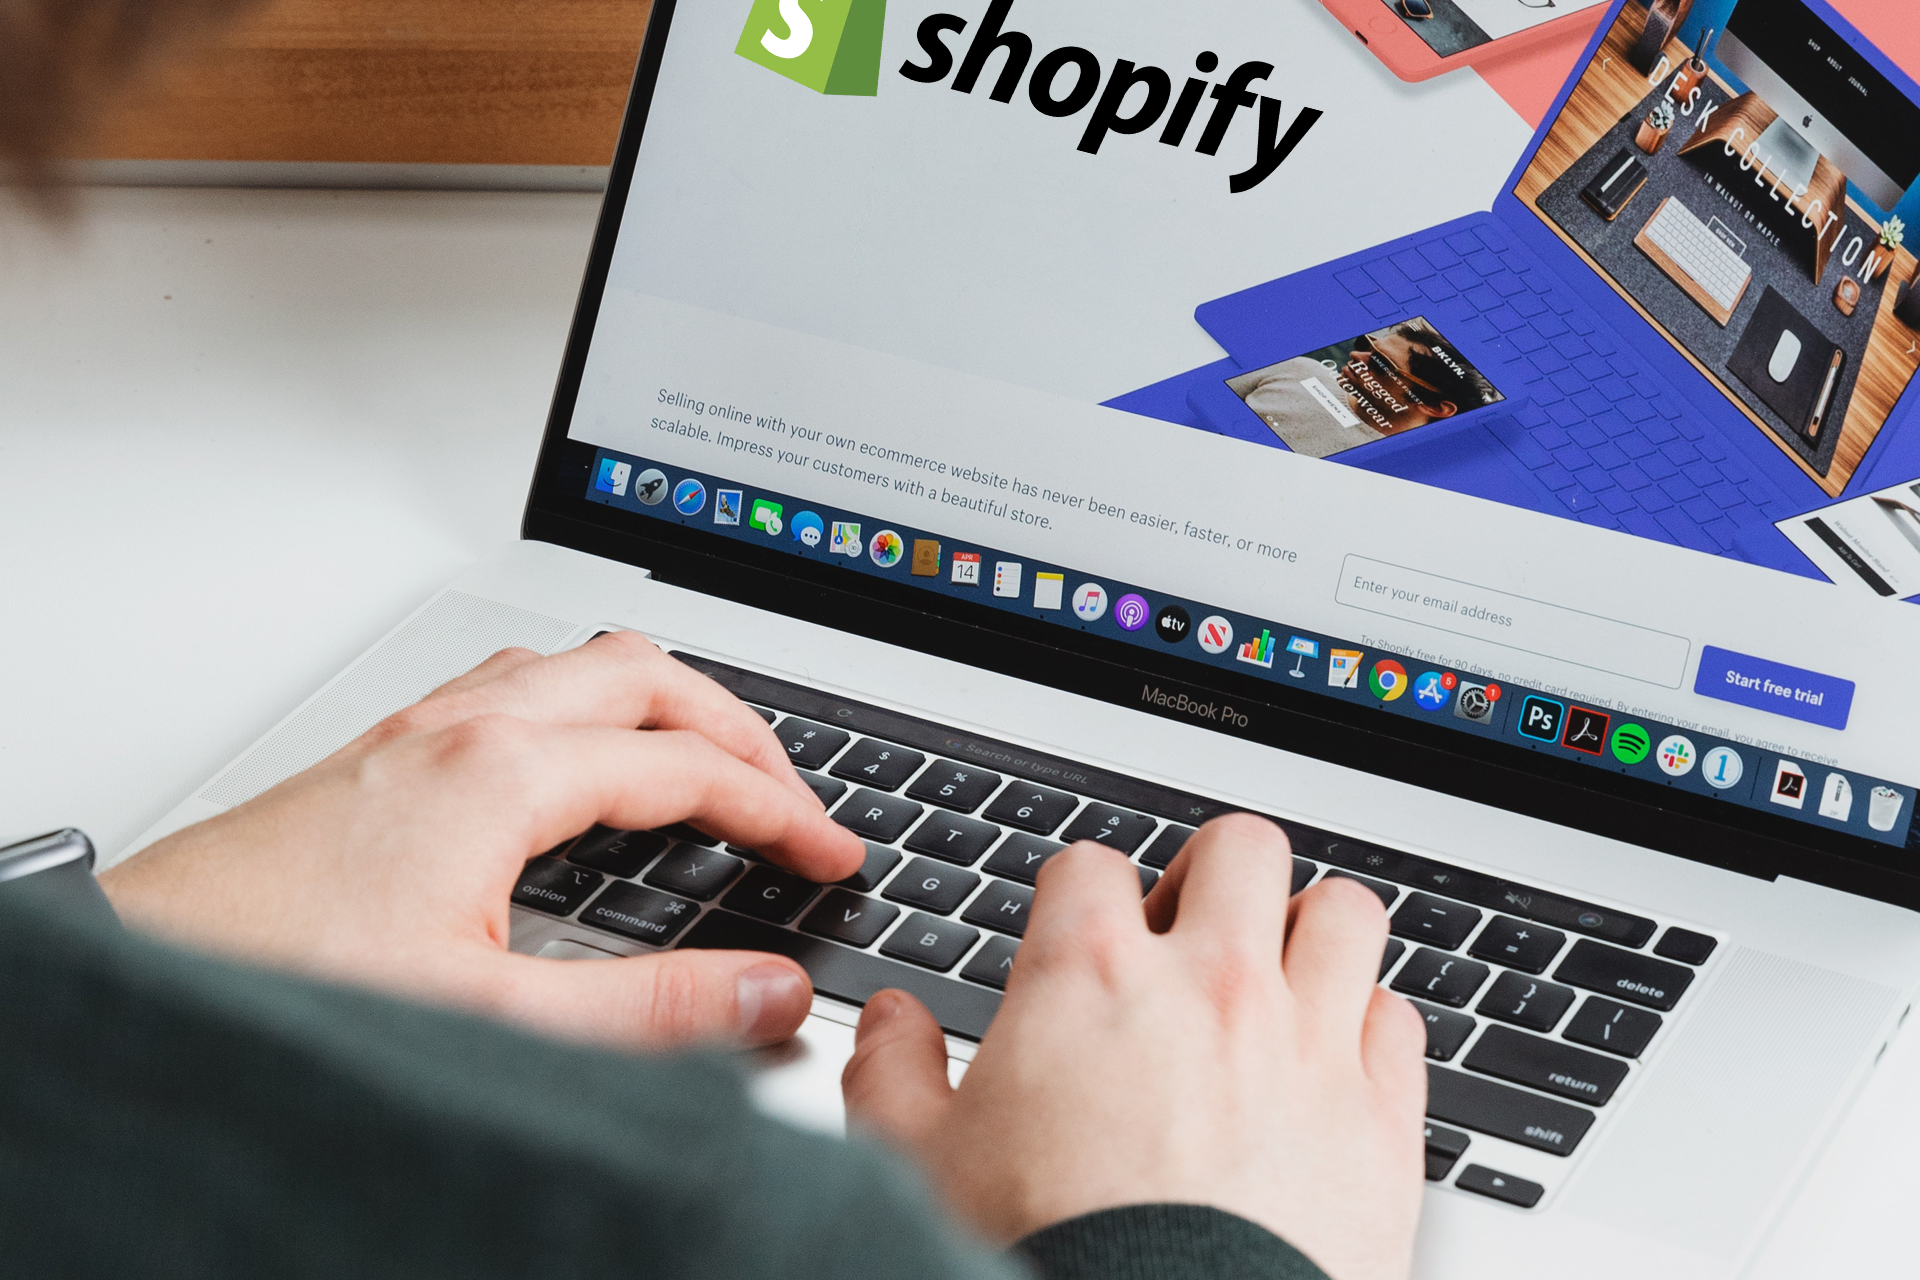 [WEBINAR] How To Add Wall Art Products To Your Shopify Store